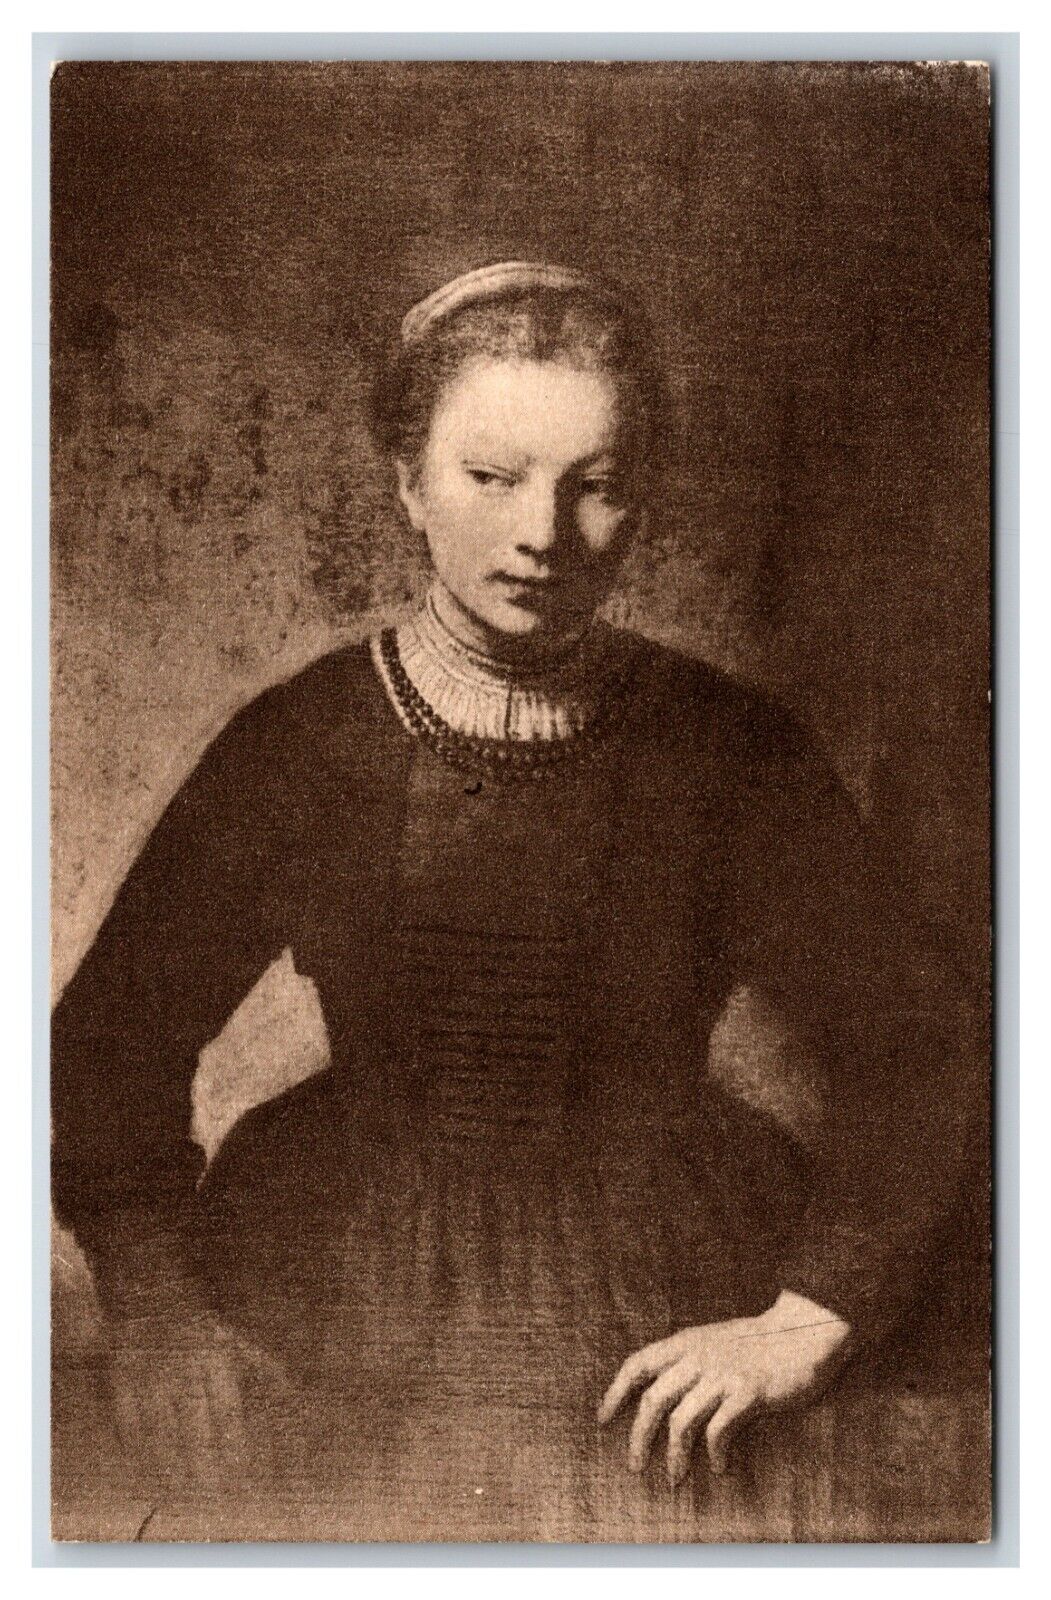 Portrait of a Girl By Rembrant UNP Art Institute of Chicago DB Postcard W7